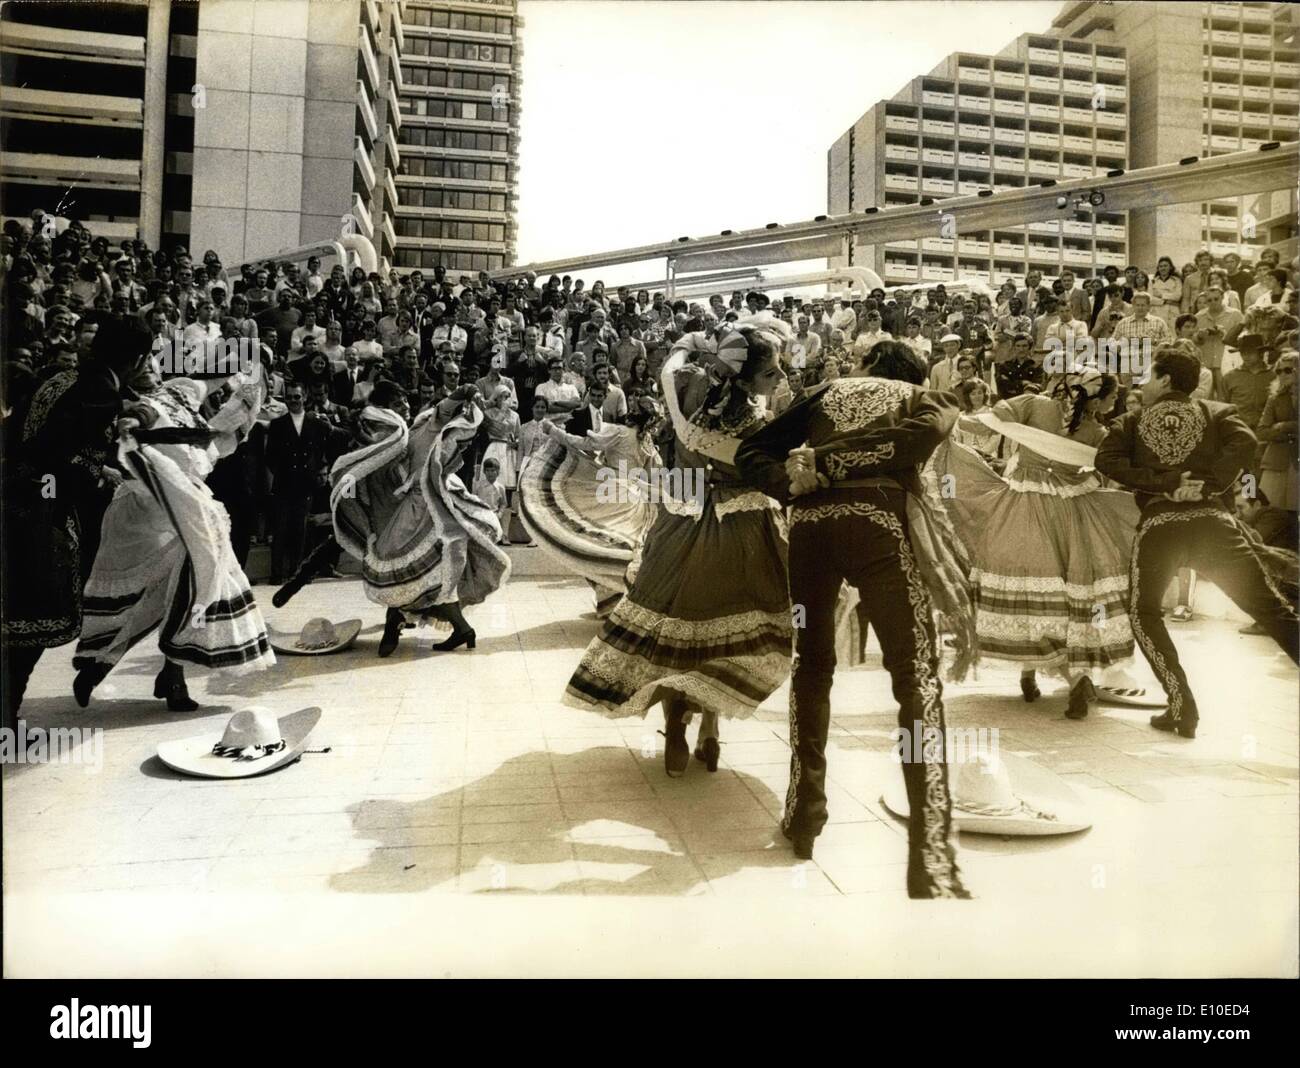 Aug. 08, 1972 - Munich Olympics to open tomorrow: Photo shows a group of Mexican dancers performing in the Olympic village before a crowd of spectators. Stock Photo